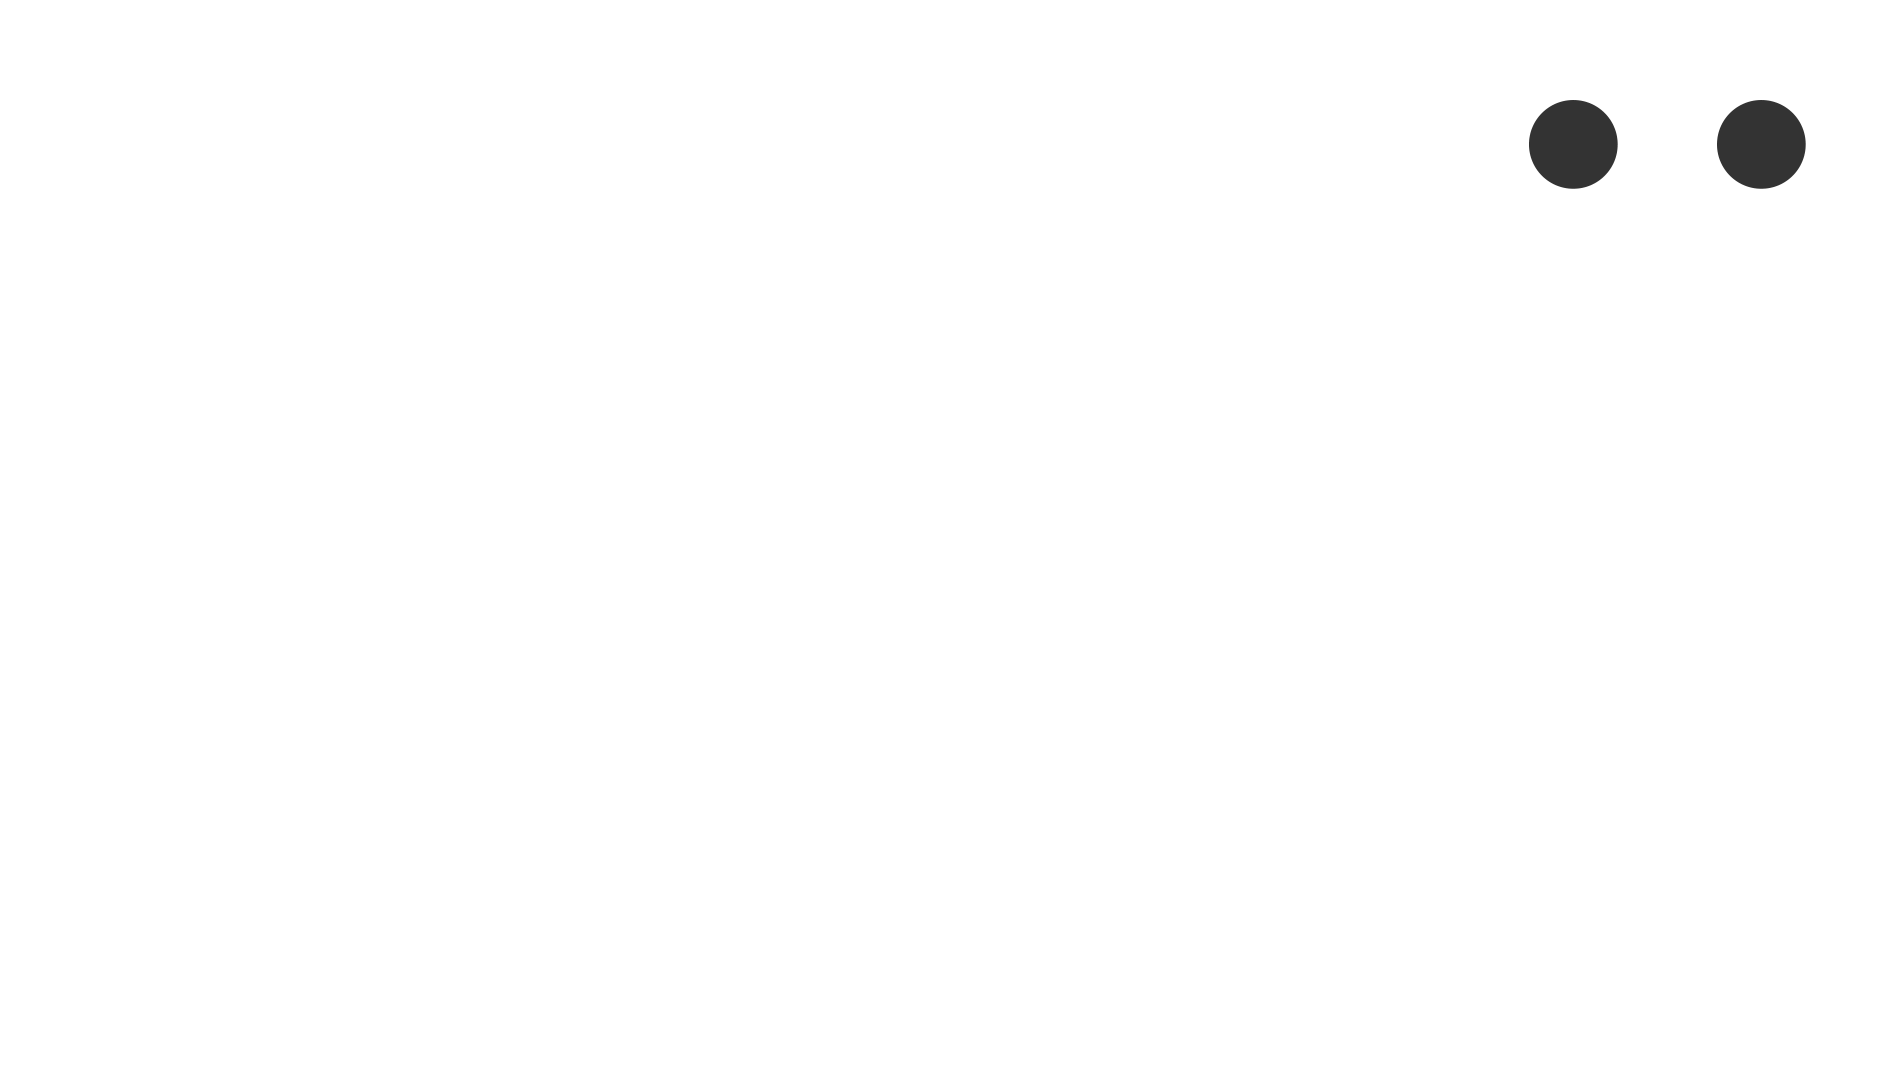 FOREIGN? NO PROBLEM, LET US HELP YOU.